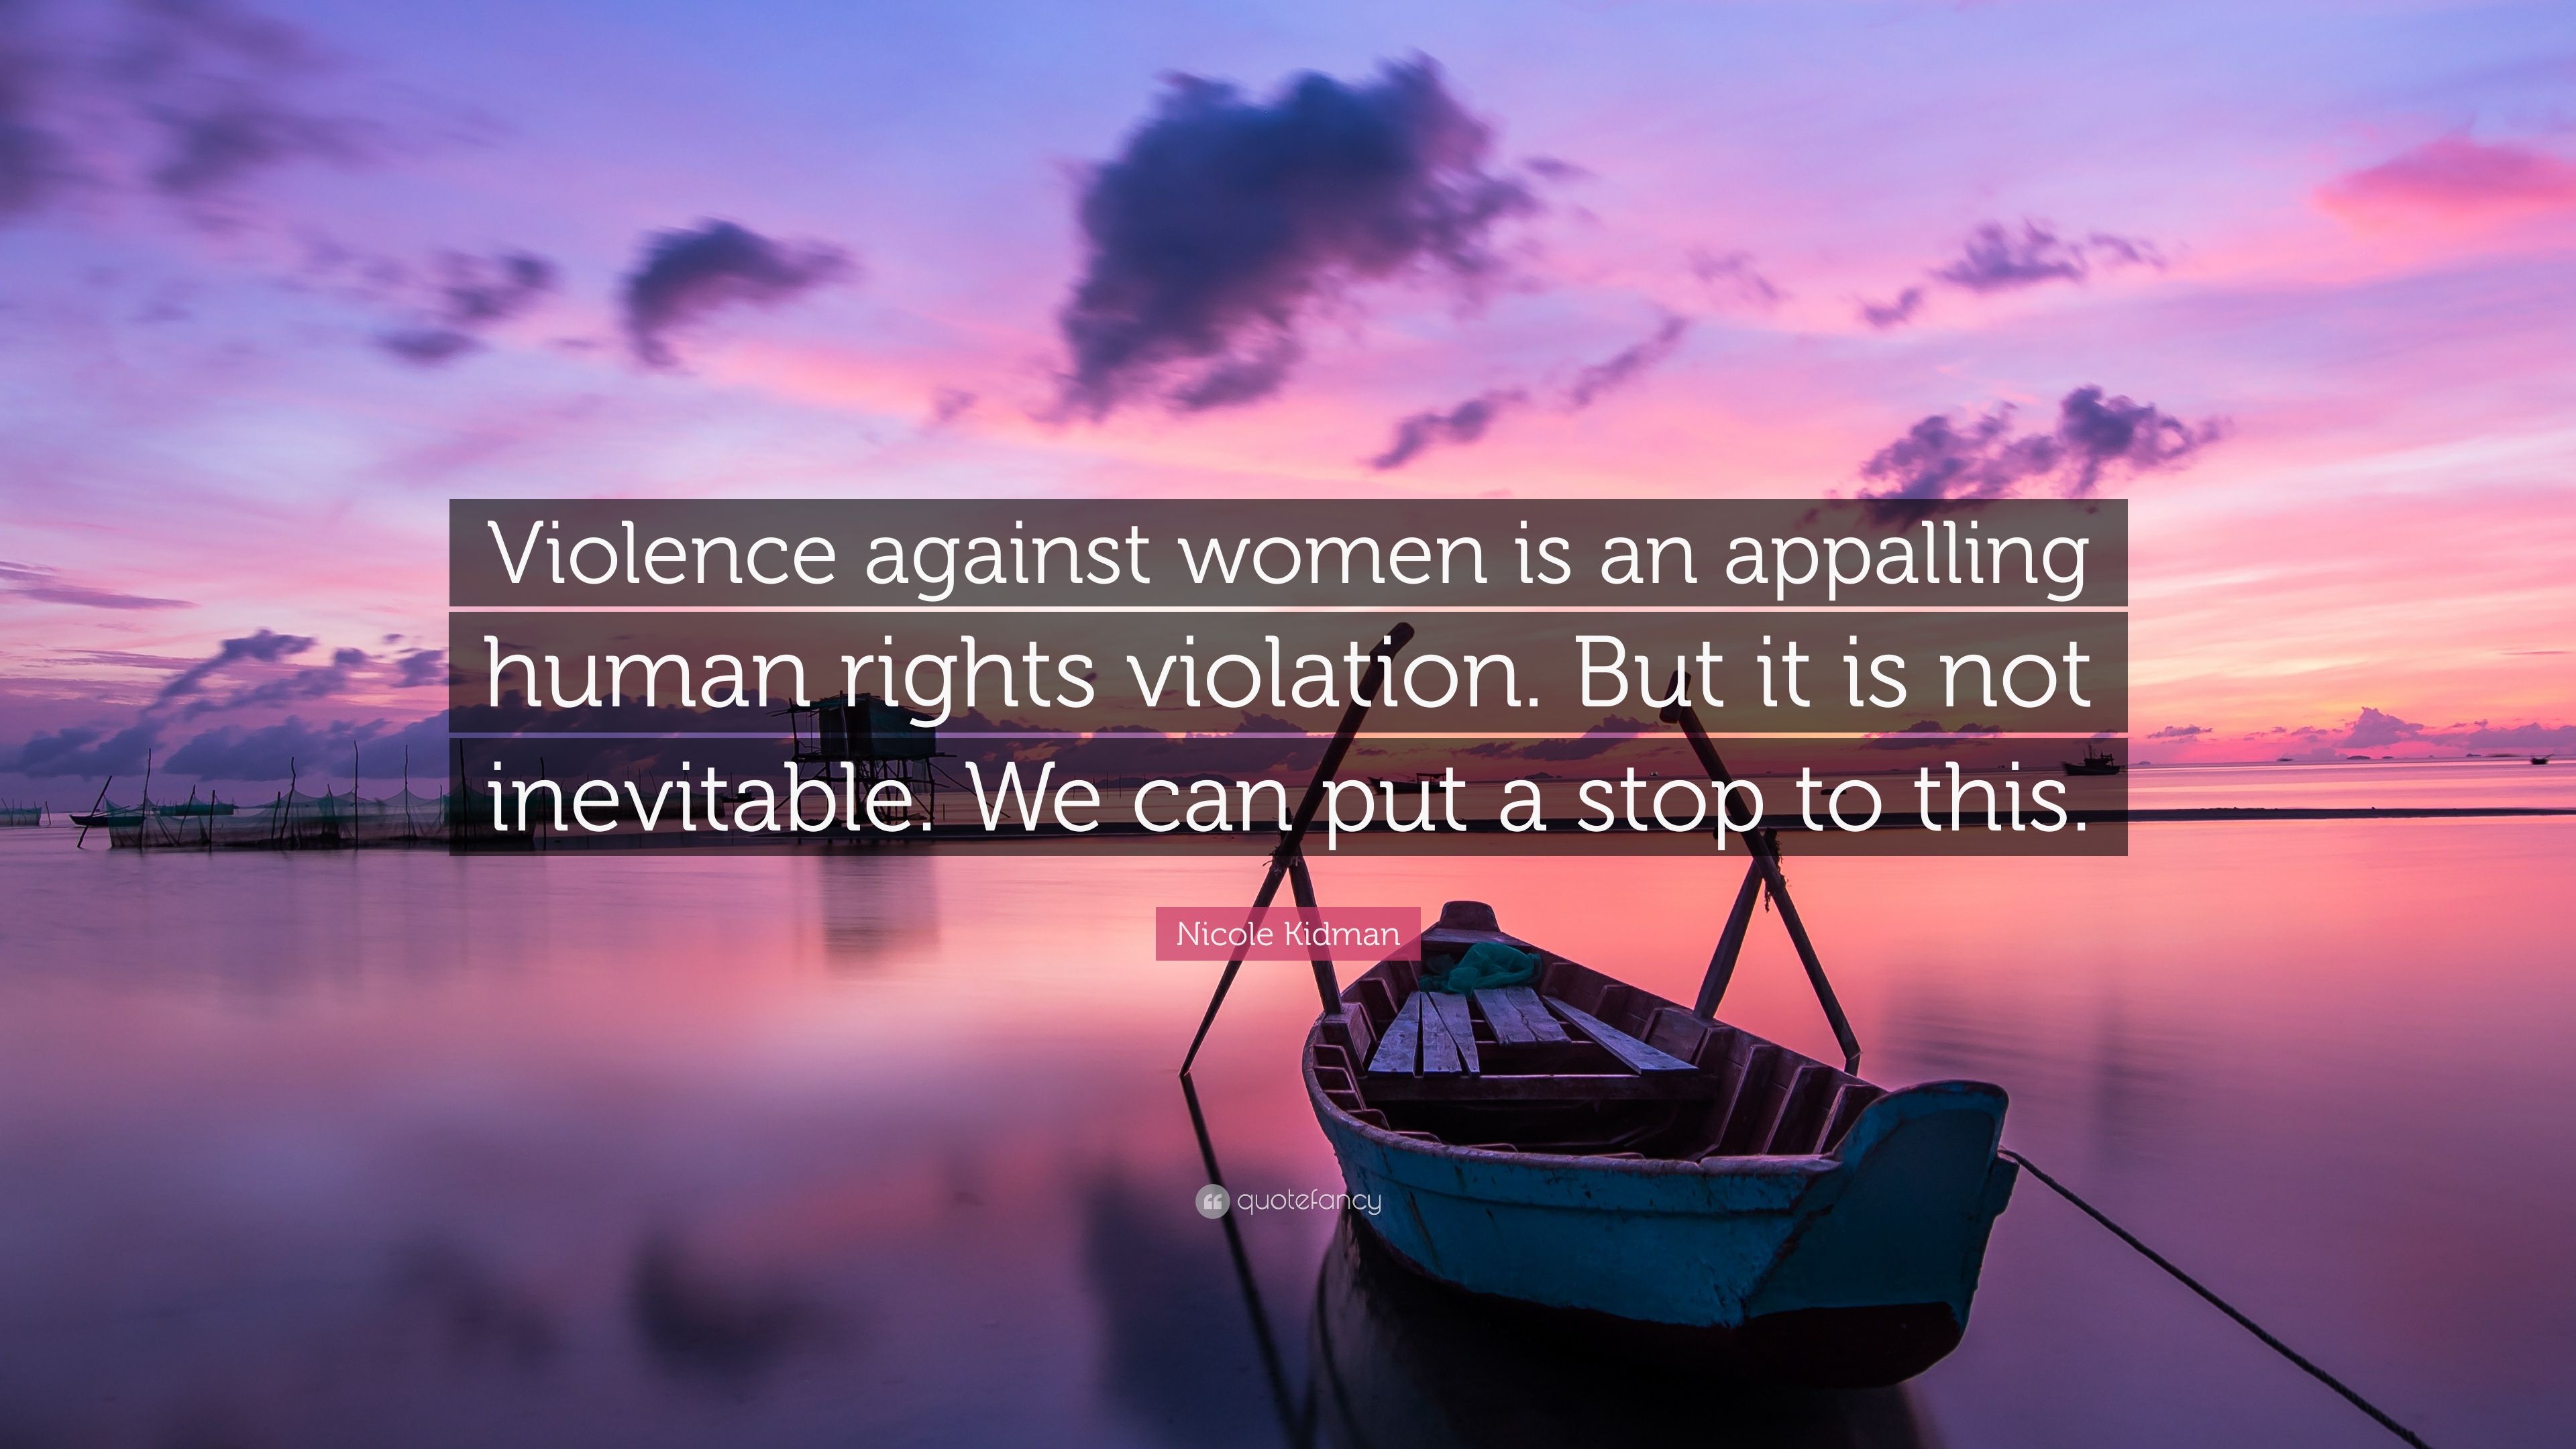 Nicole Kidman Quote: “Violence against women is an appalling human